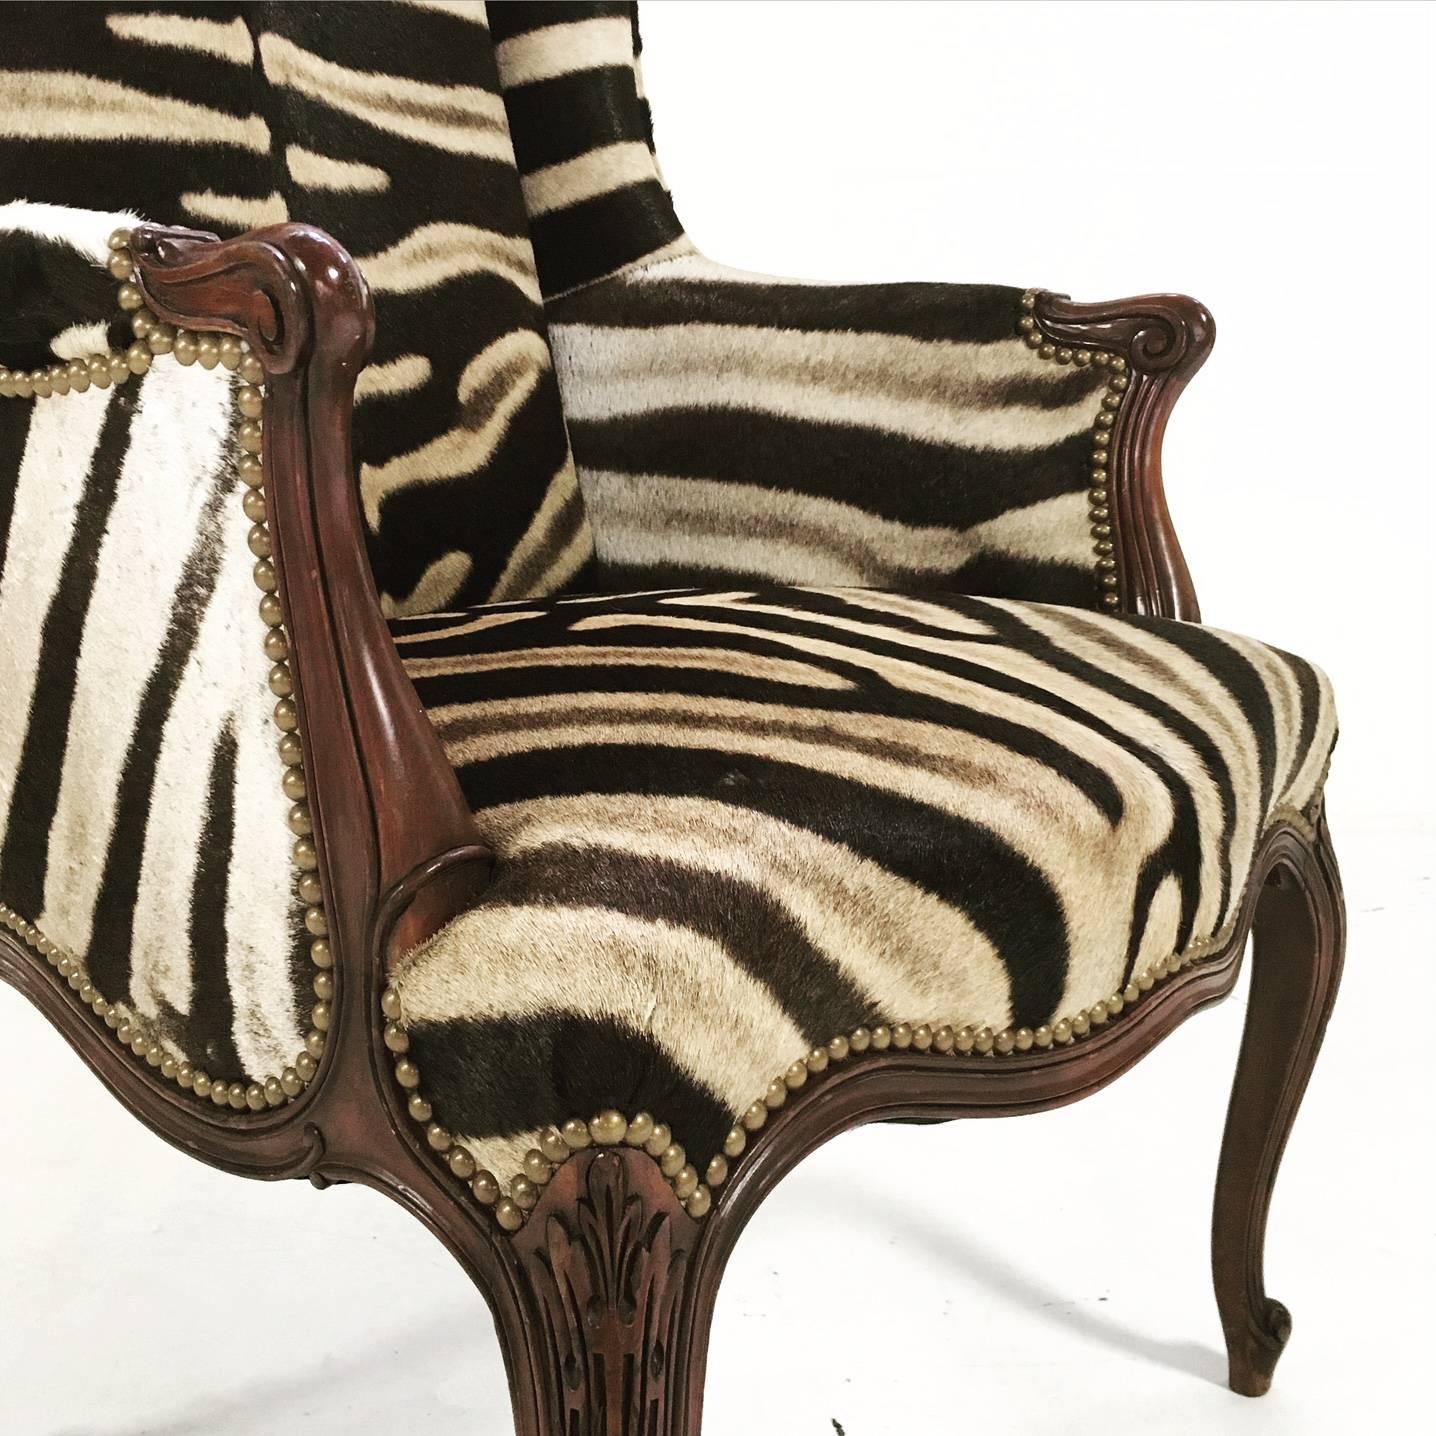 20th Century Vintage English Neoclassical Style Mahogany Wingback in Zebra